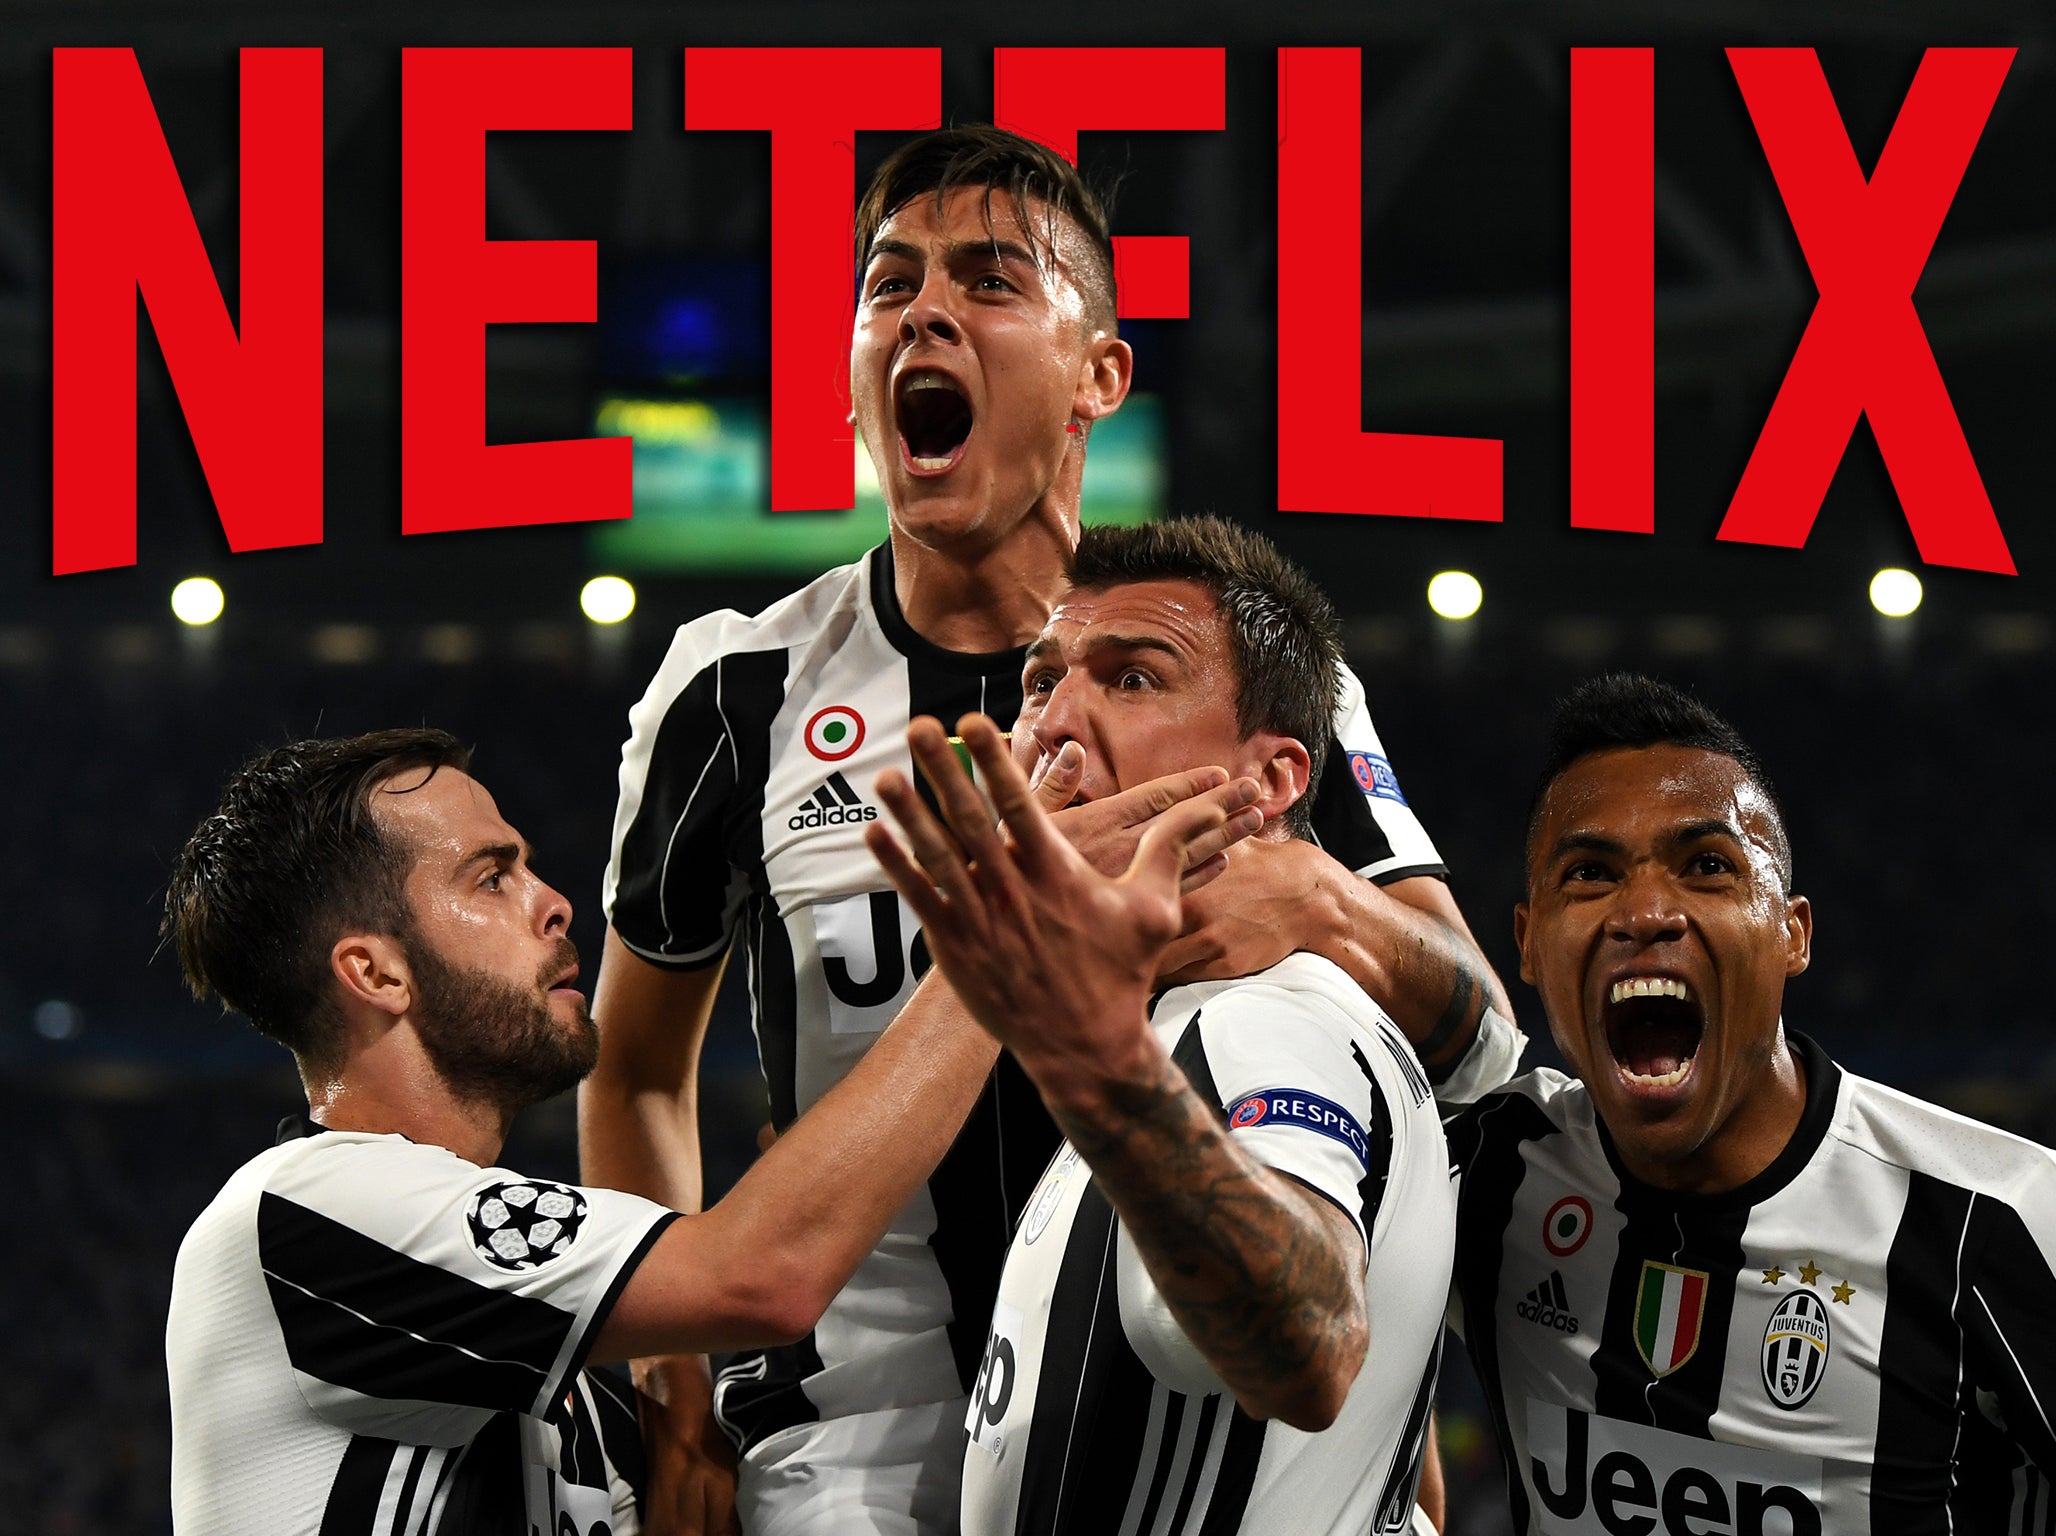 Juventus: Coming soon to a screen near you